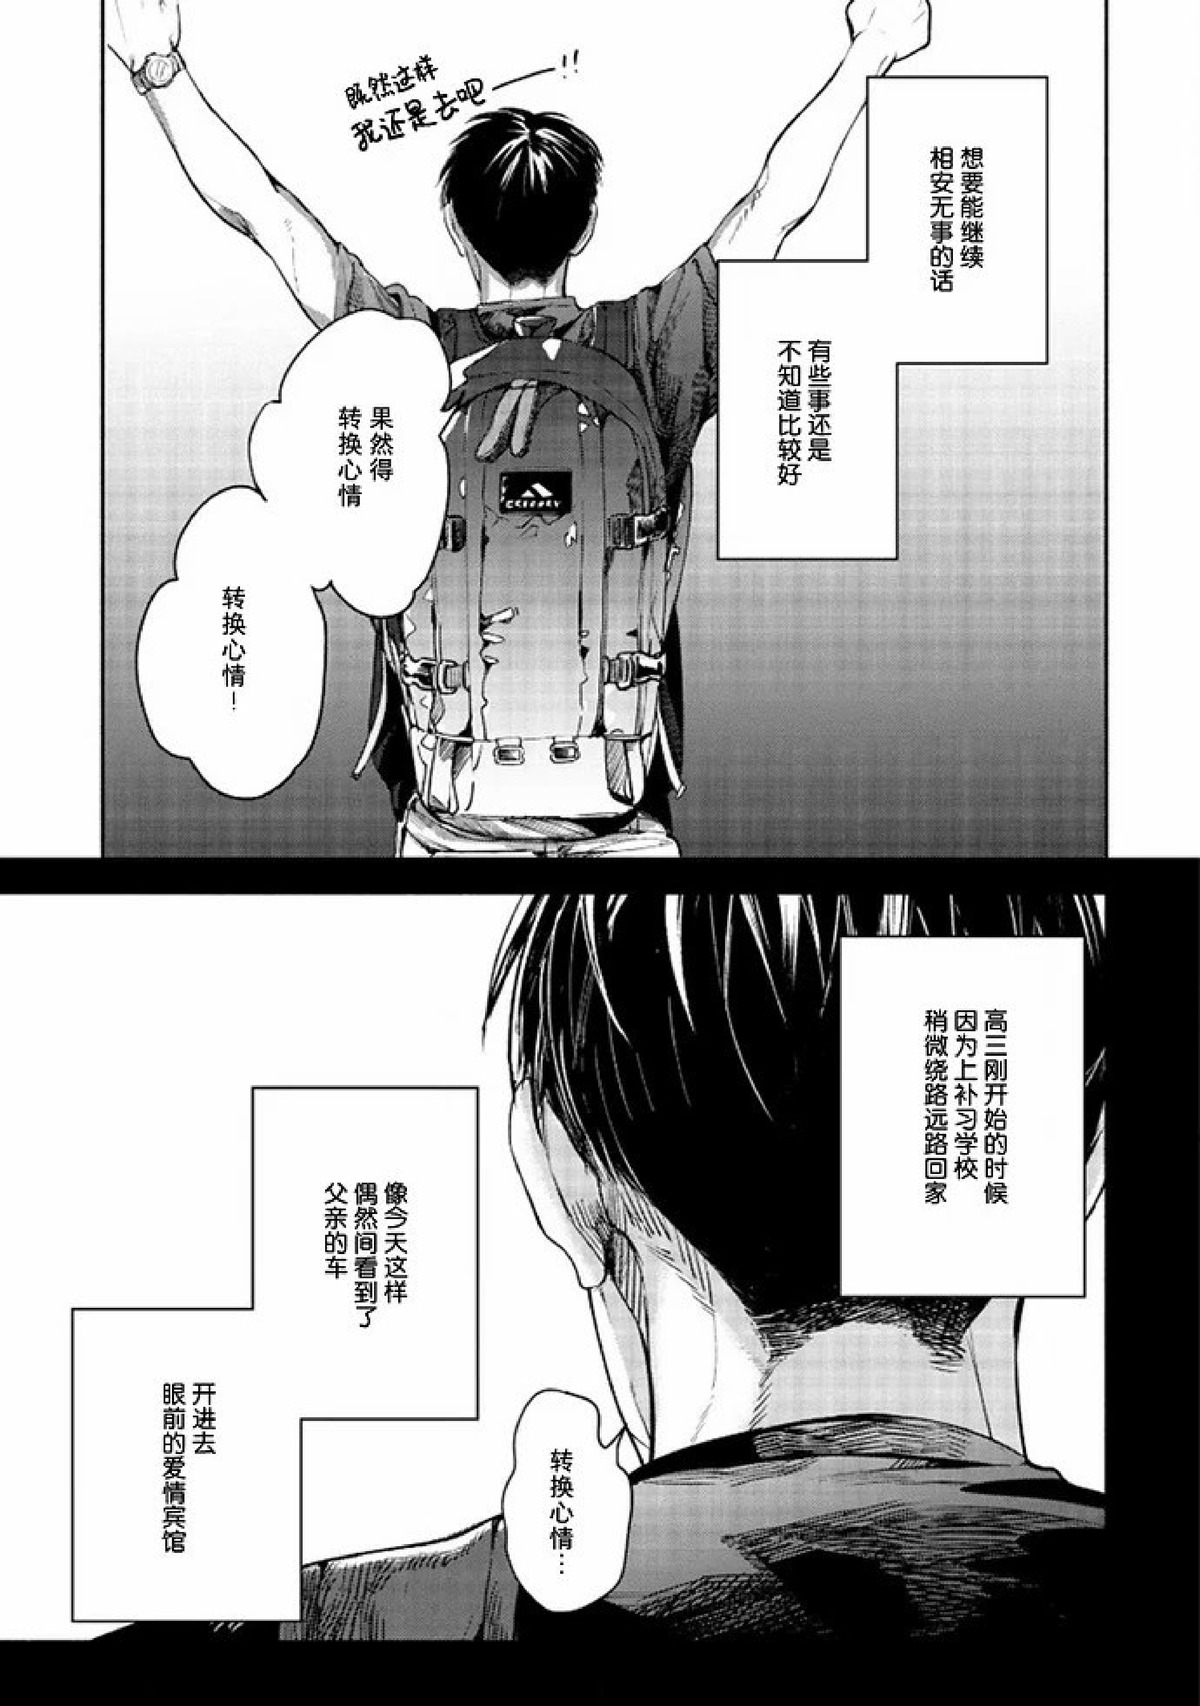 【Two sides of the same coin[腐漫]】漫画-（上卷01-02）章节漫画下拉式图片-31.jpg